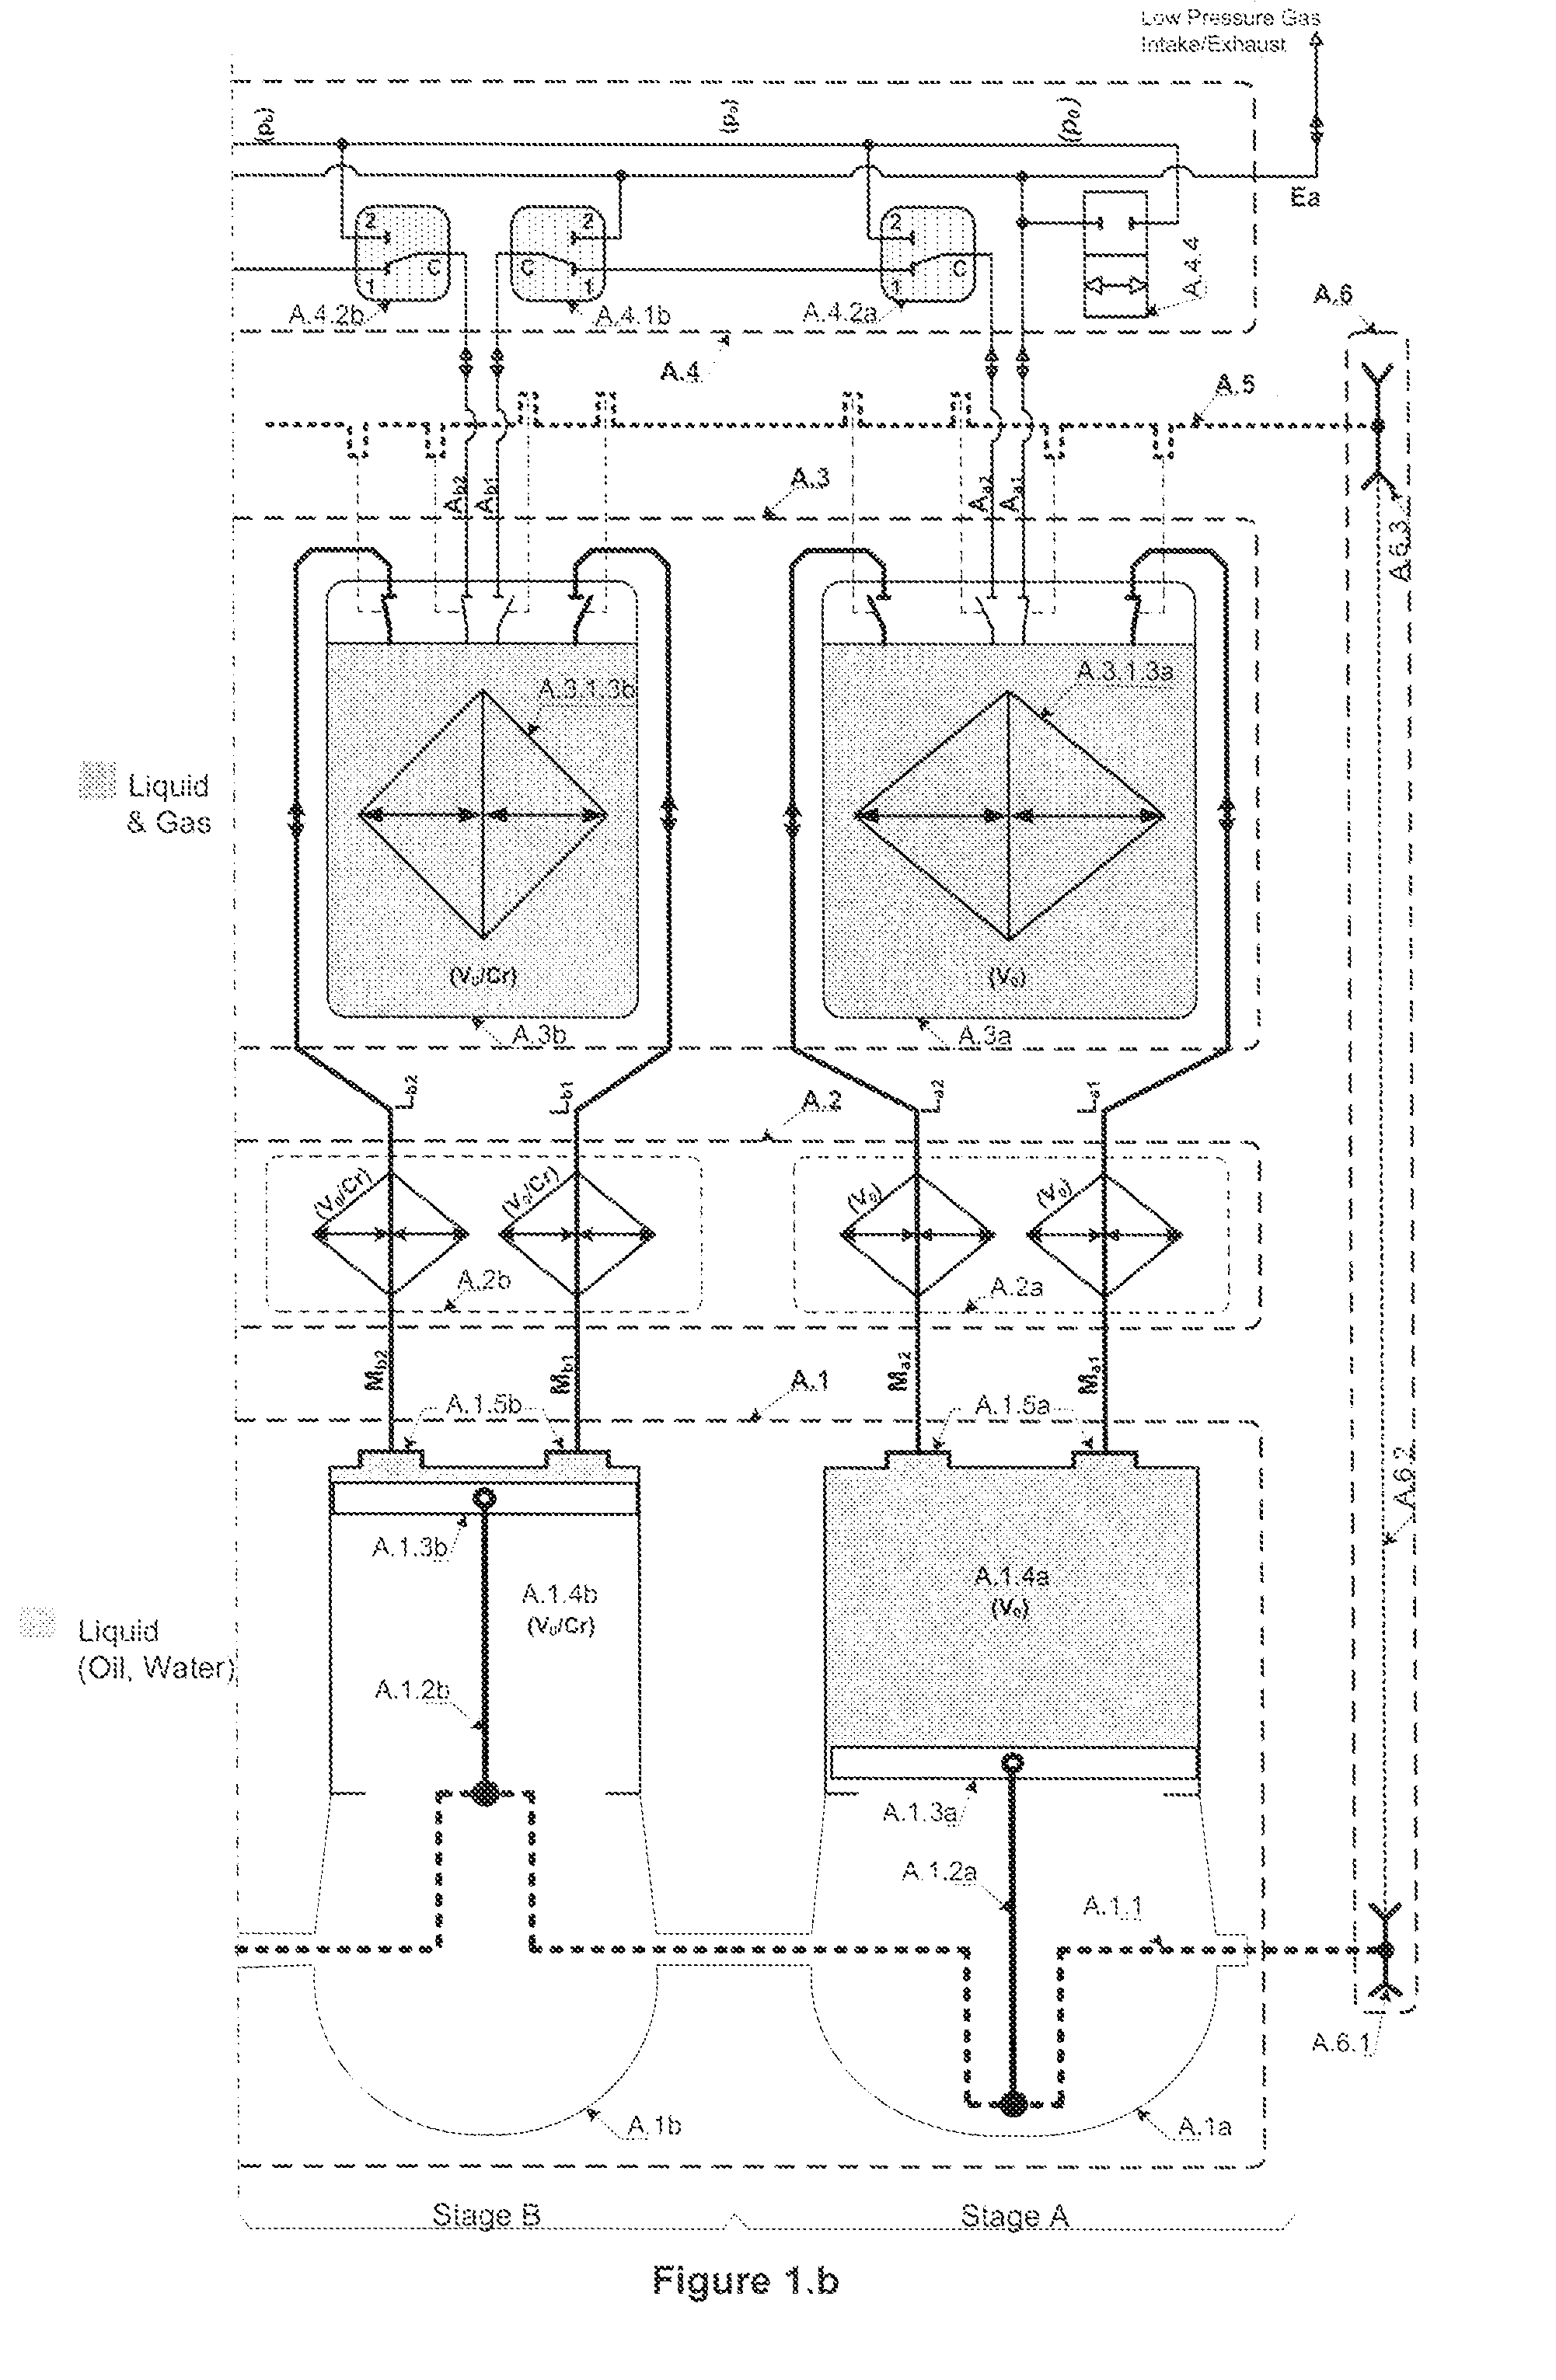 Multistage hydraulic gas compression/expansion systems and methods